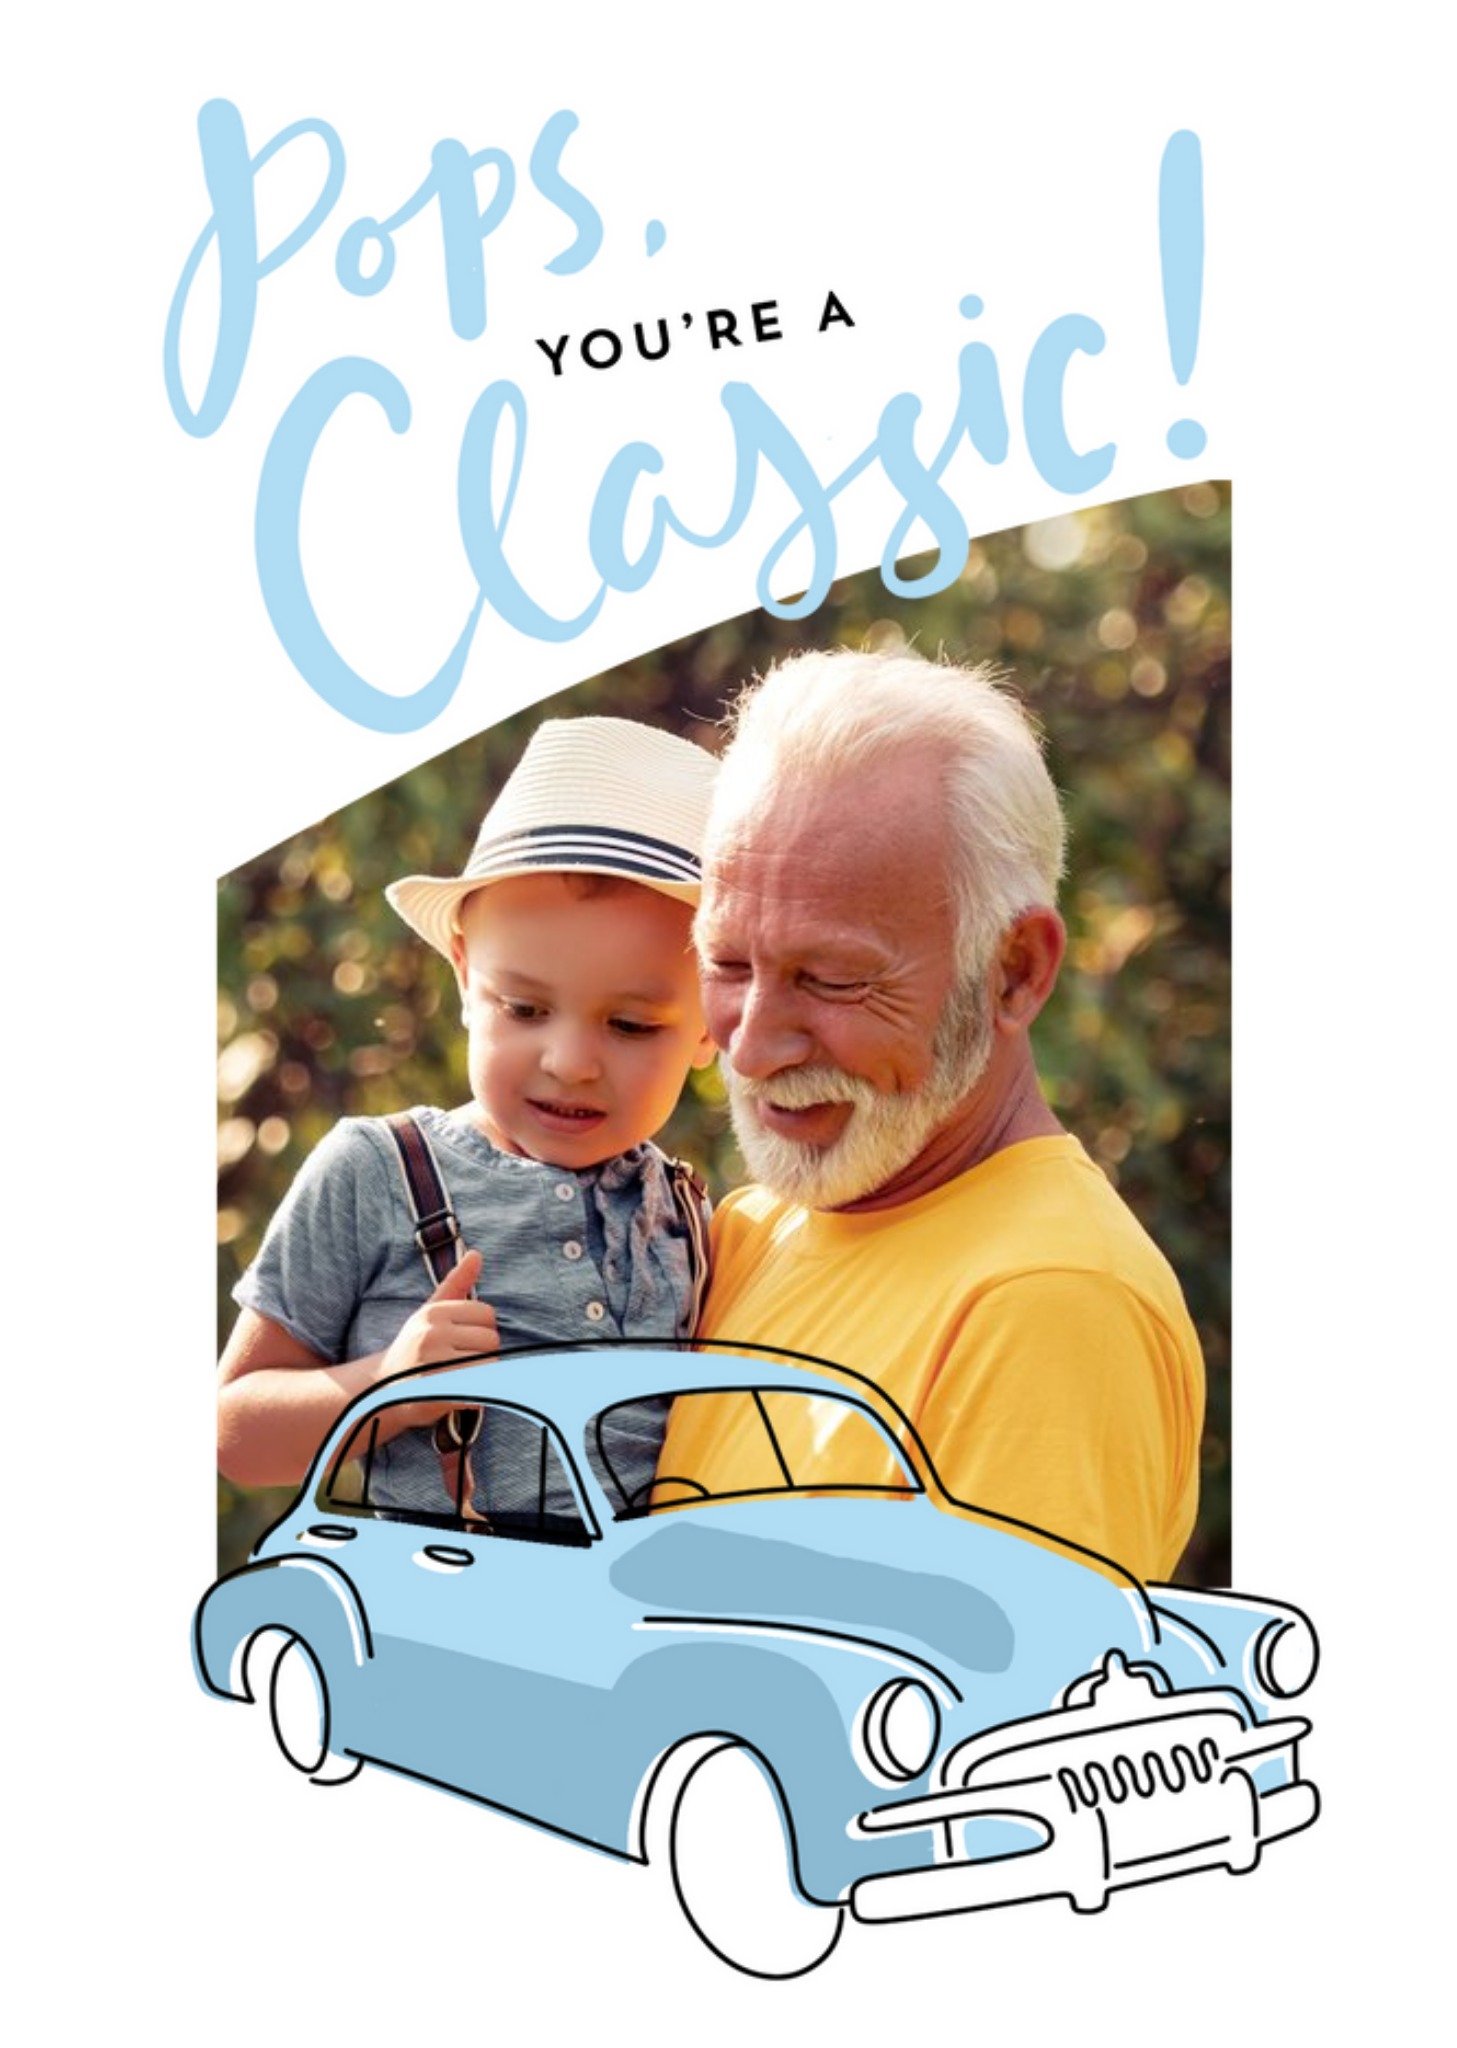 Moonpig Simple Life Illustrated Vintage Car Photo Upload Pops, You're A Classic Card Ecard